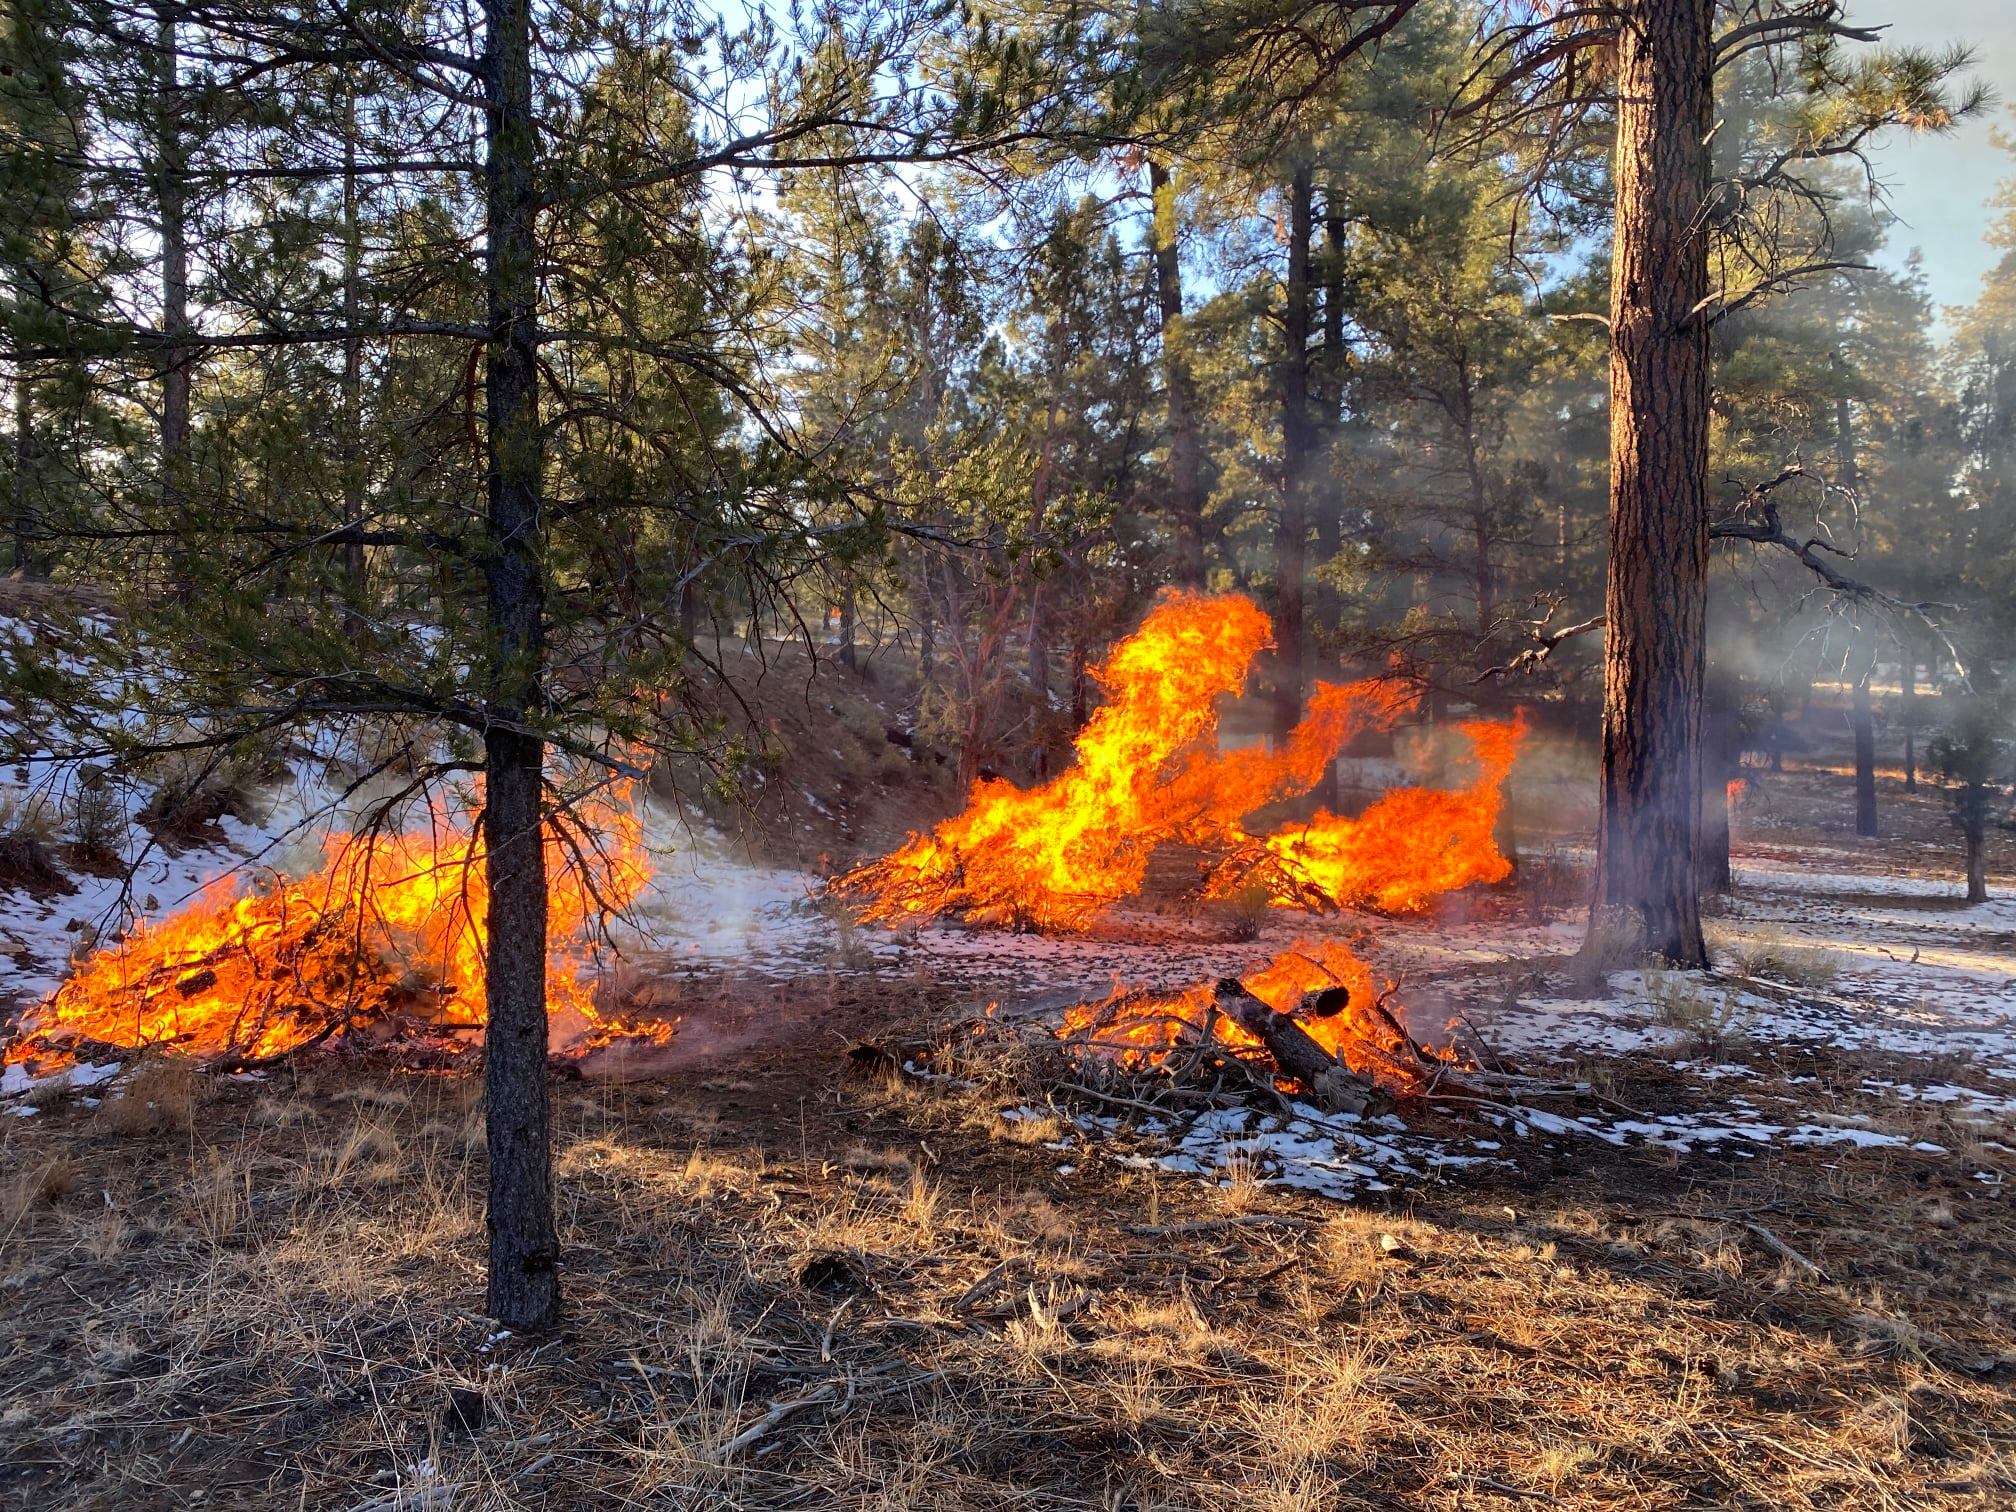 Two large piles of woody debris is ignited with snow on the ground